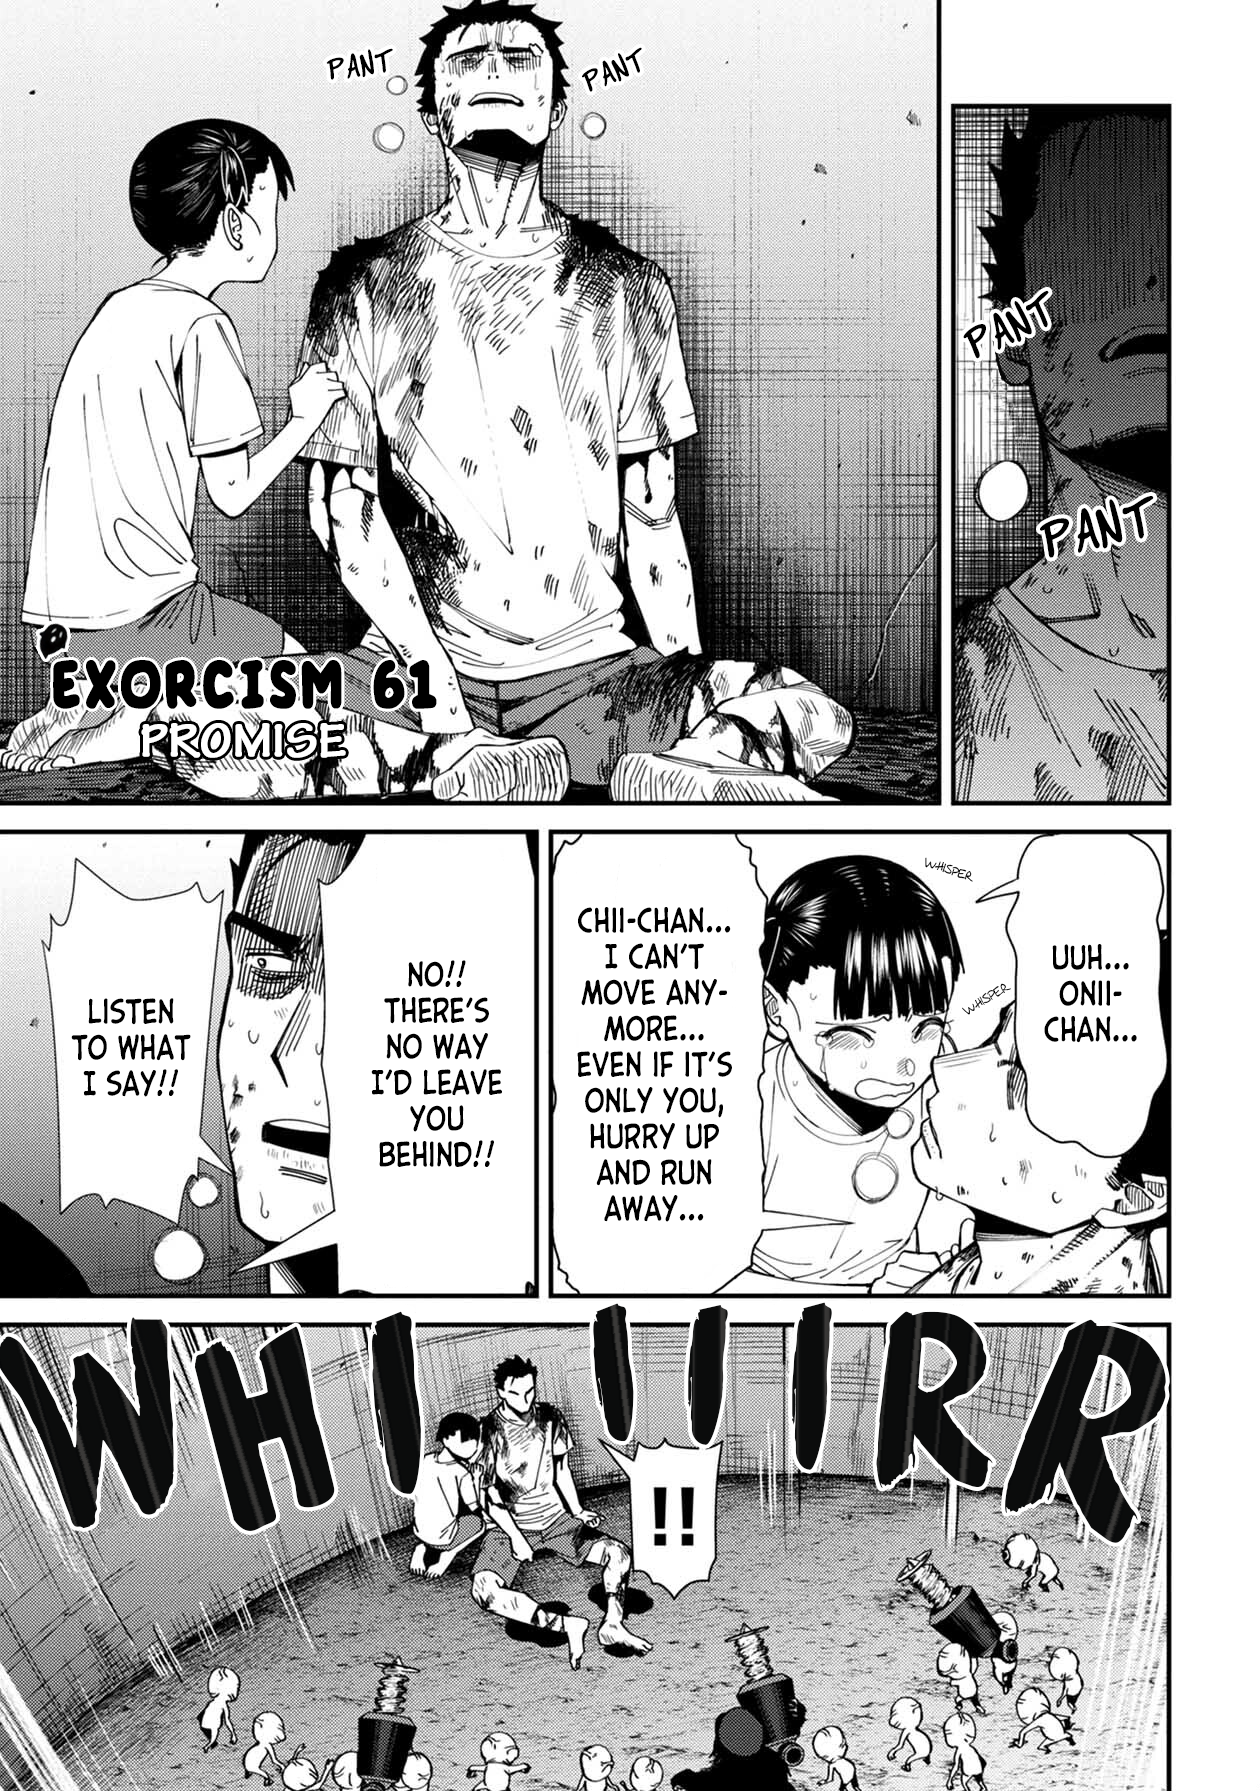 Bad Girl-Exorcist Reina Vol.6 Chapter 61: Exorcism #61 - Promise - Picture 1